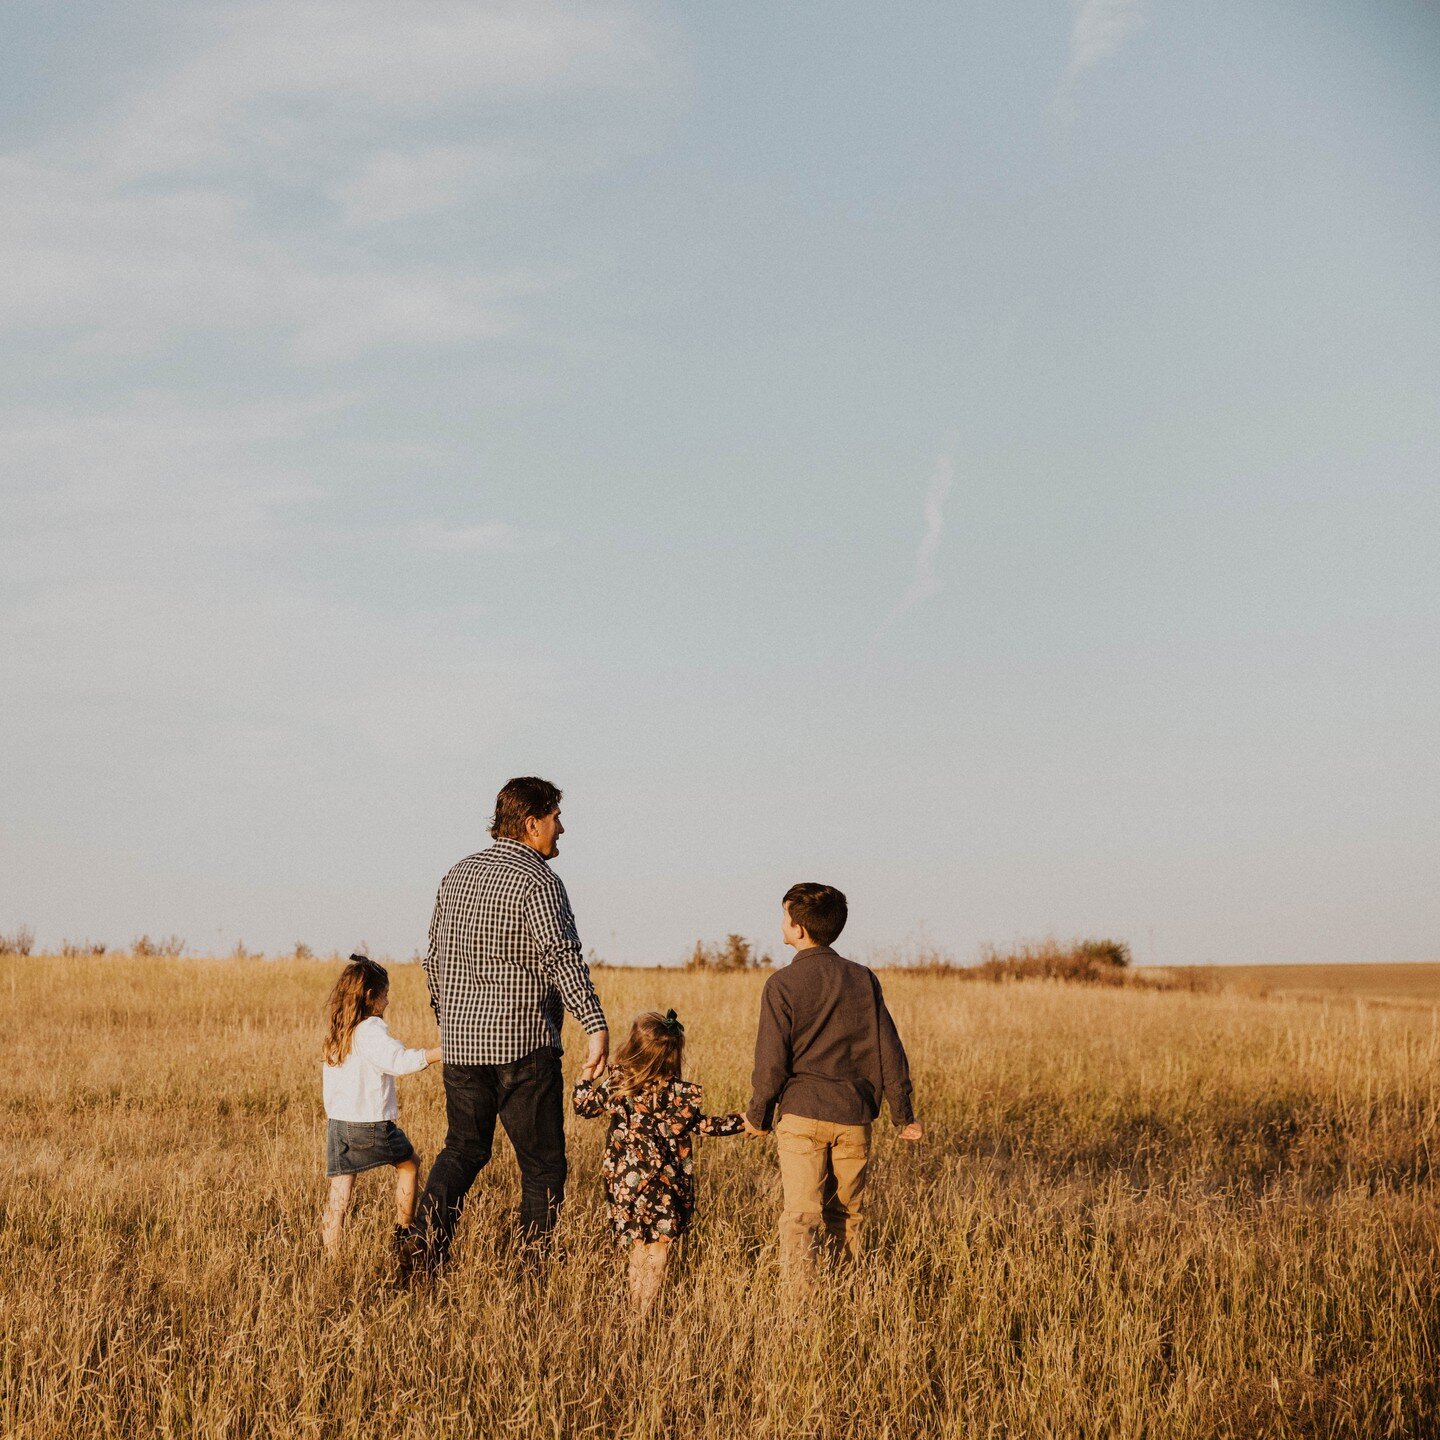 I had the privilege of photographing my Uncle and his family for his 60th birthday on my grandparents farm in Kansas the last time I was there. When I first moved to Australia and told people where I was from, I'd tell them Kansas wasn't worth puttin